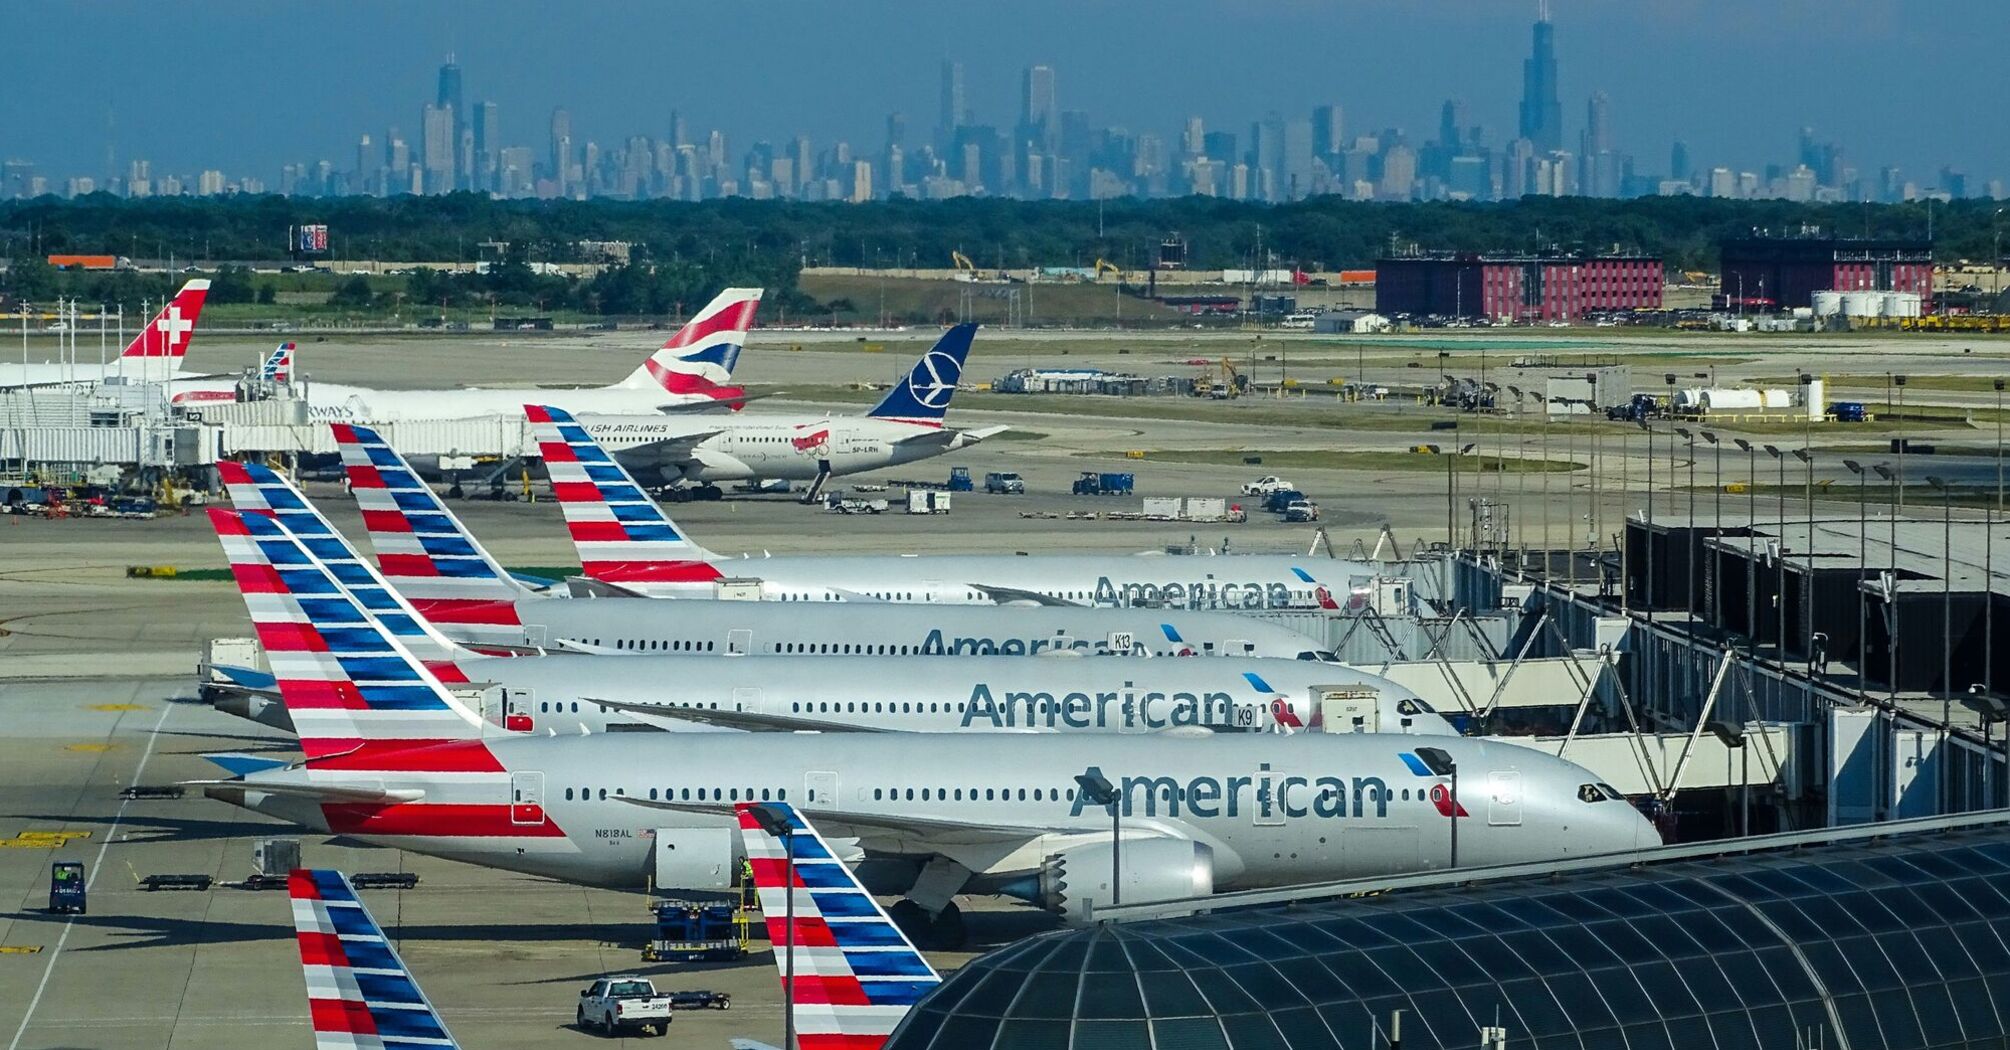 American Airlines planes on airport